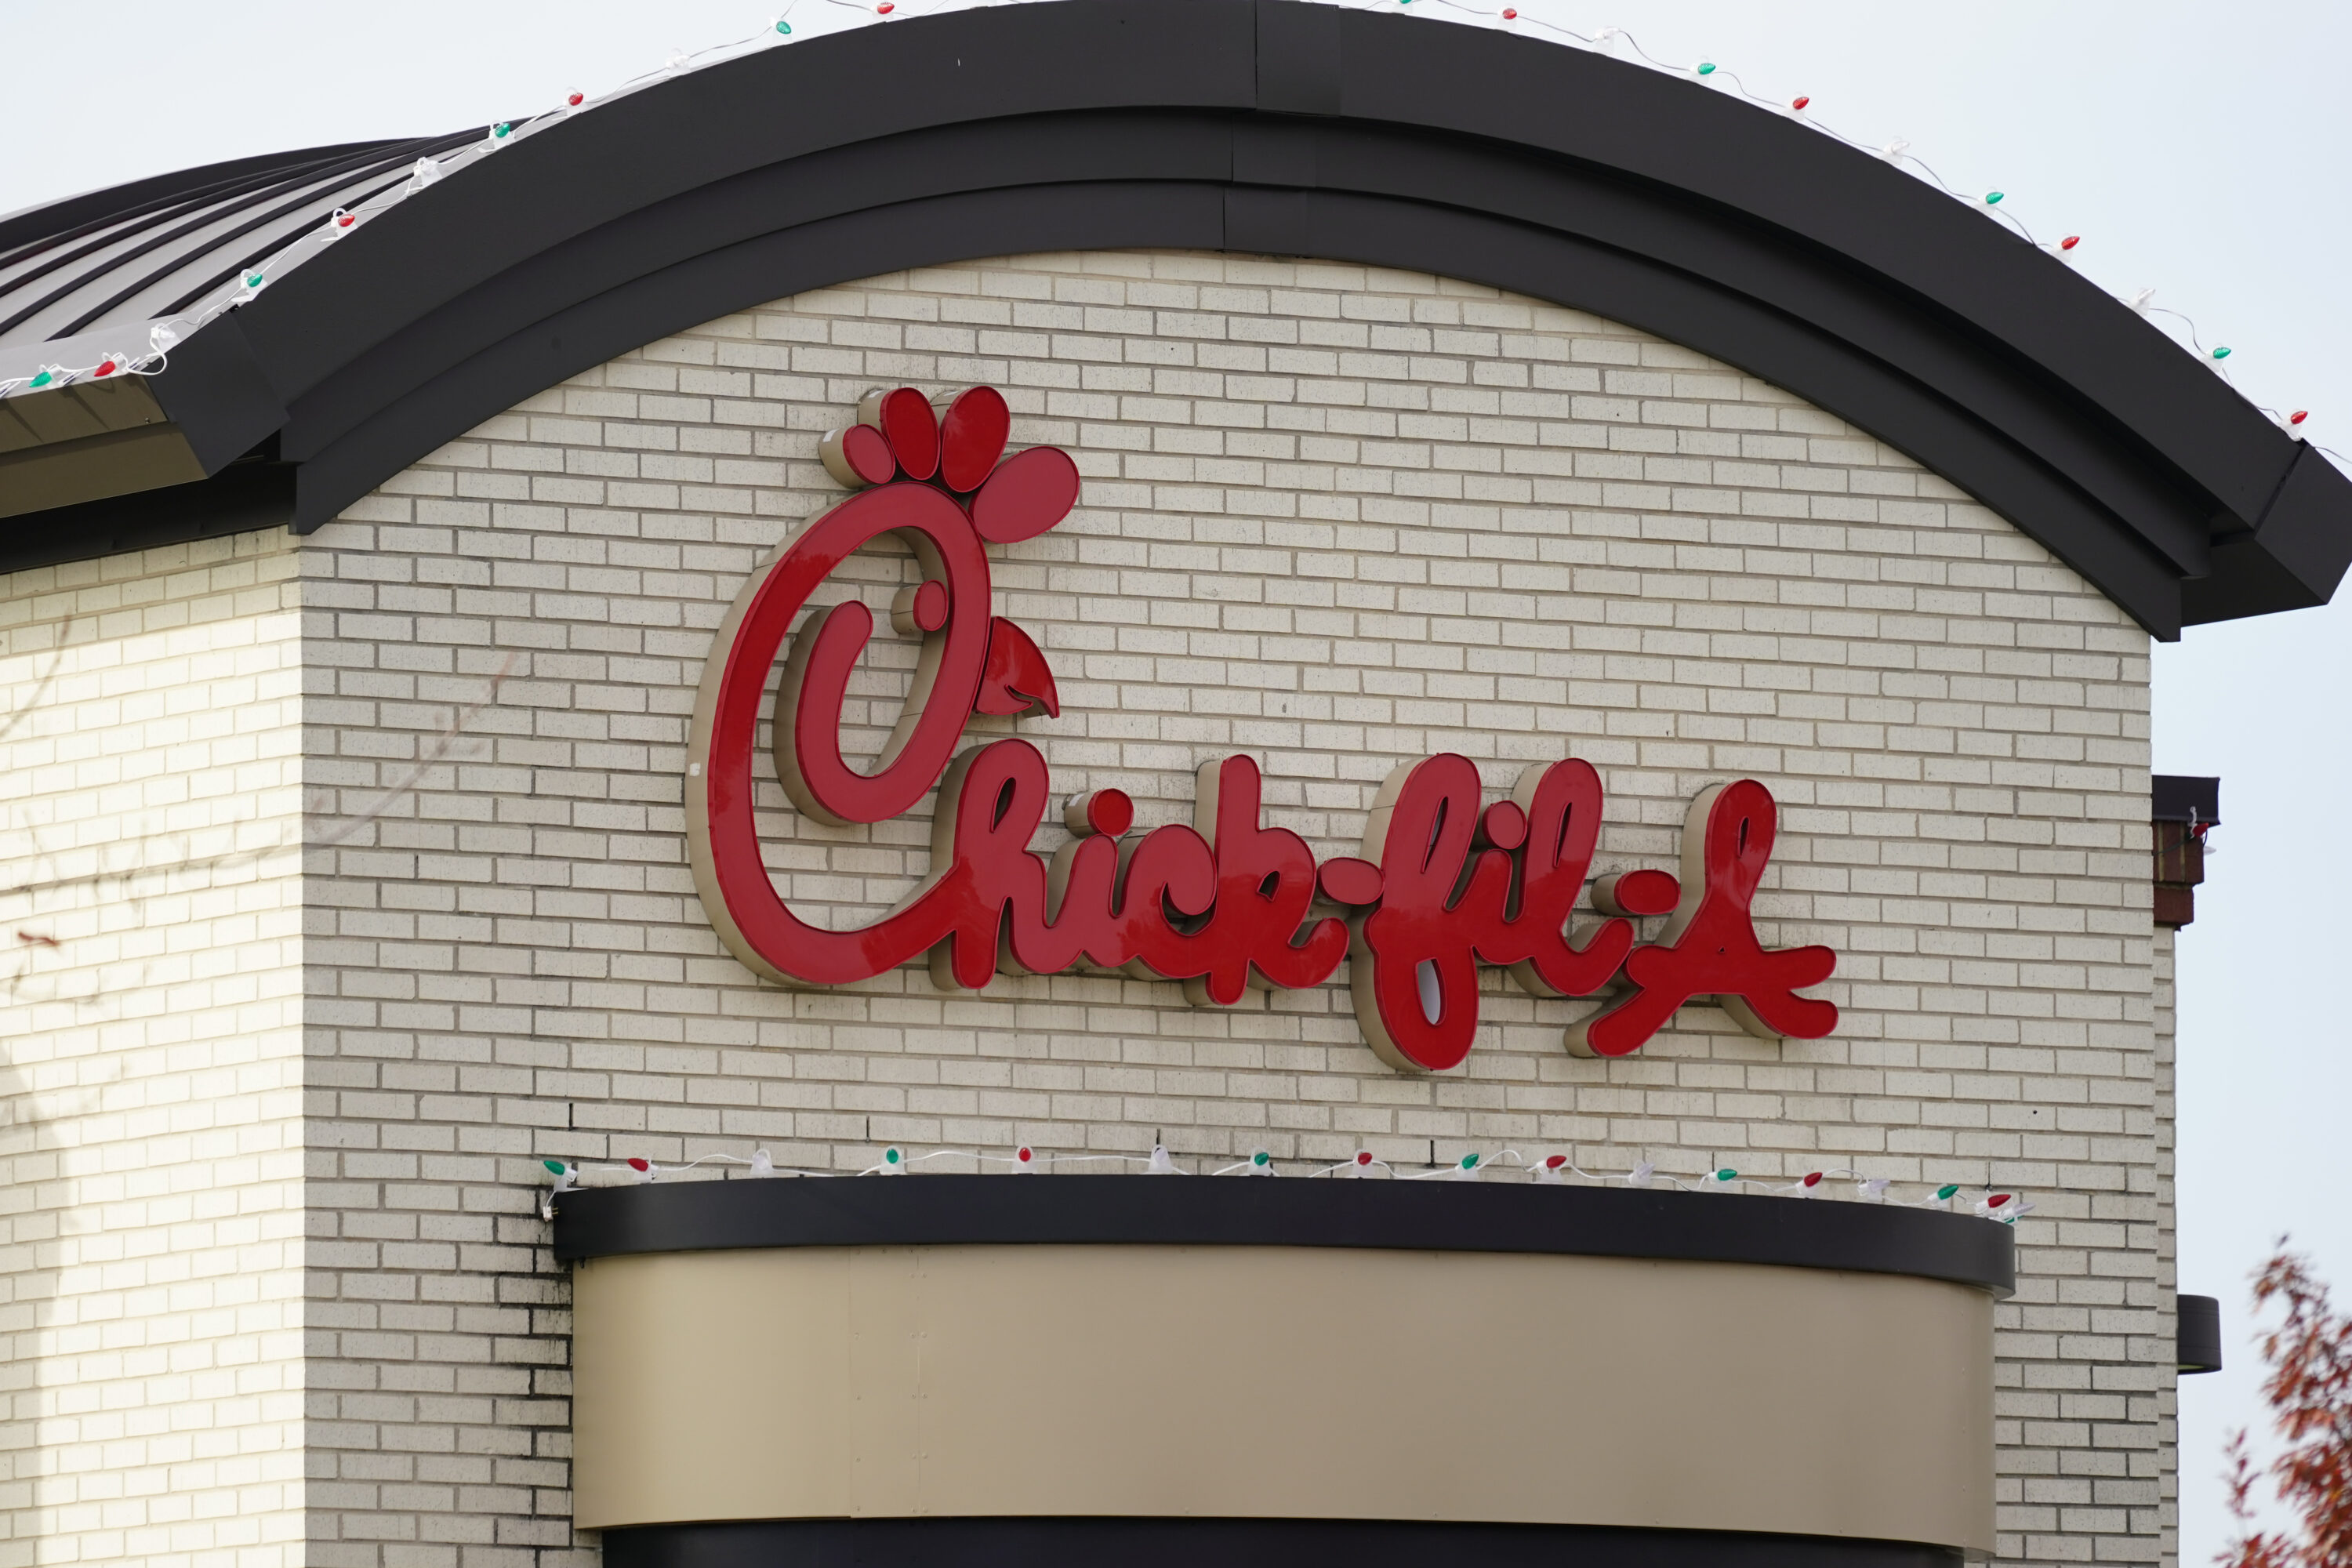 Chickfila has given out over 700,000 in scholarships to 380 greater